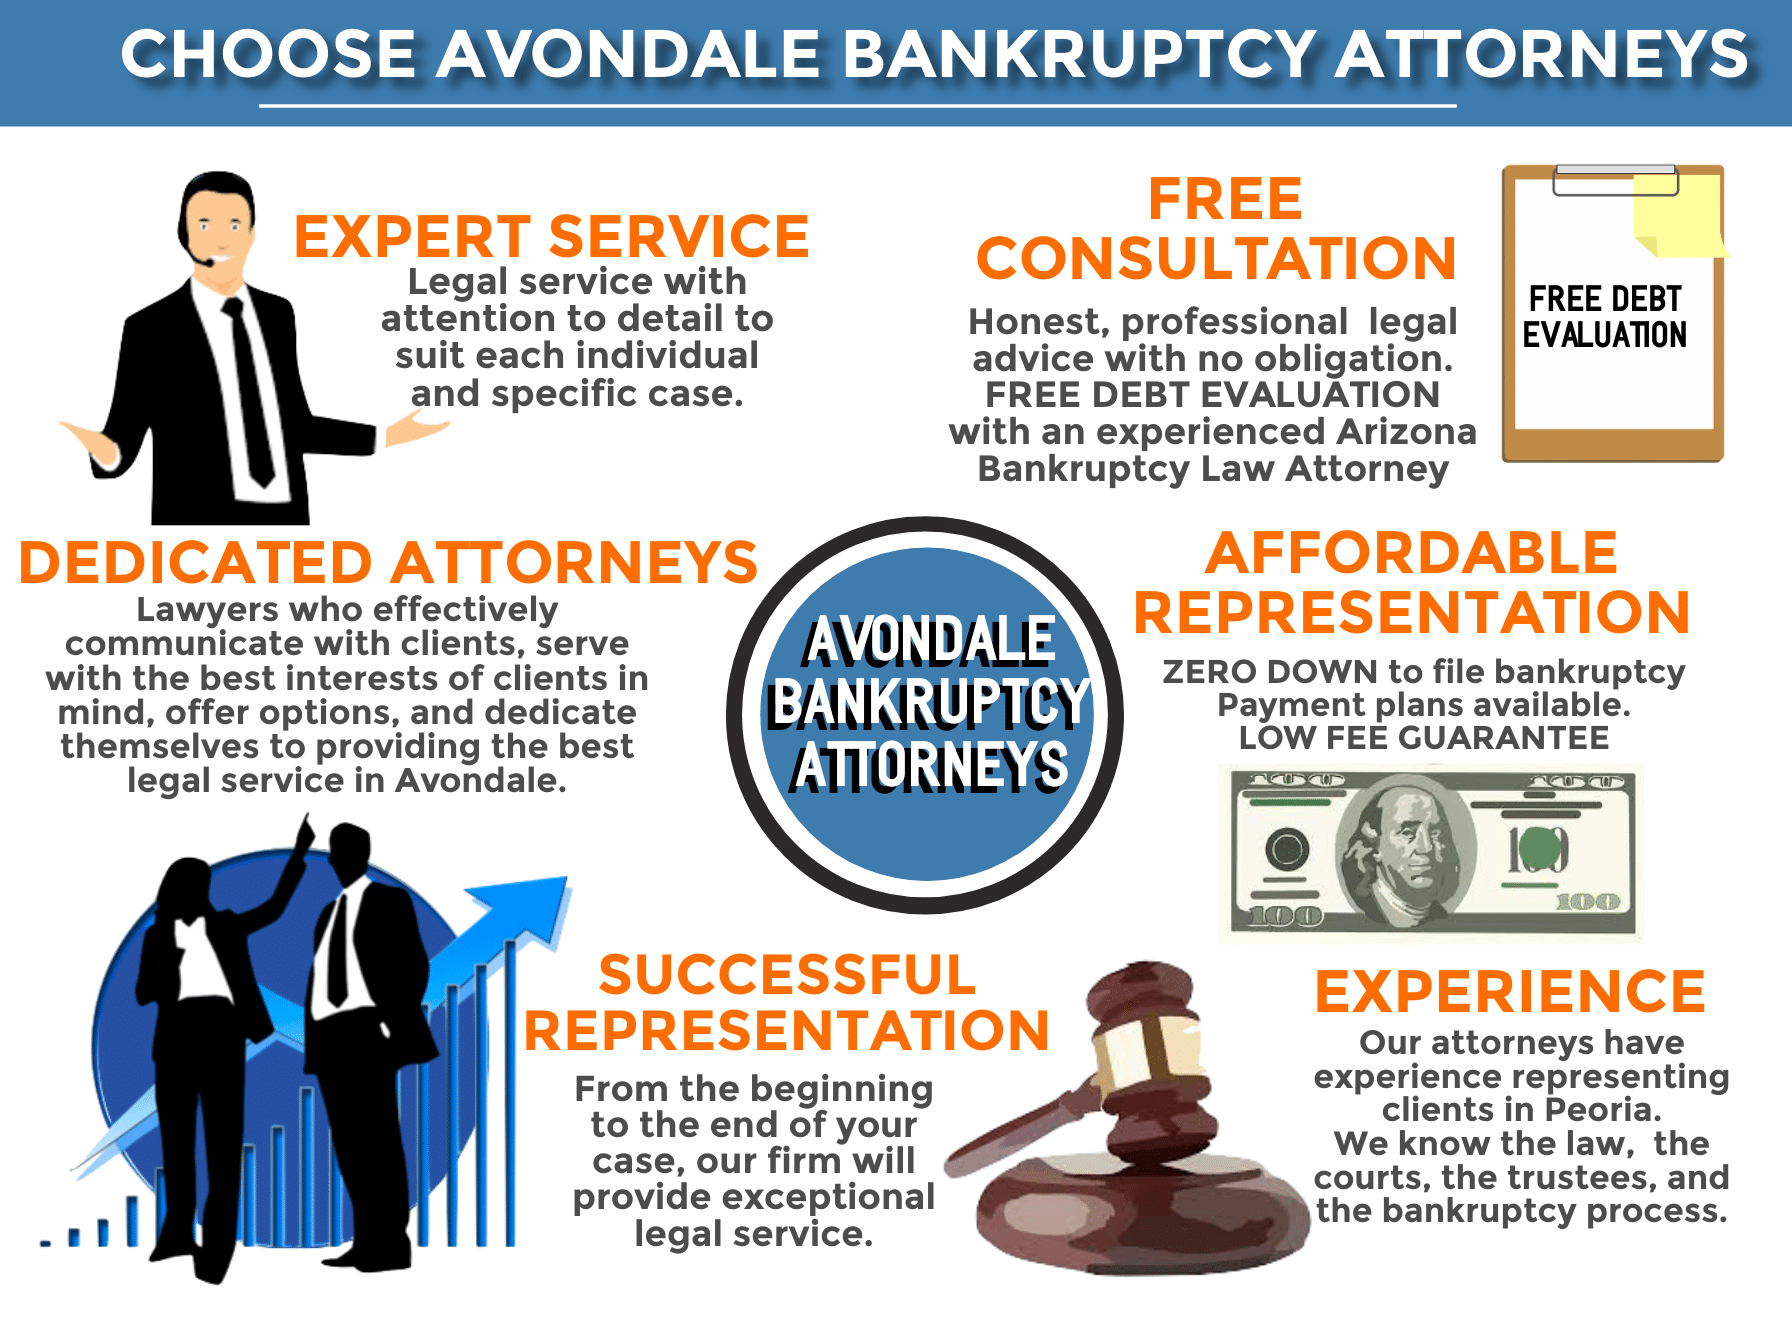 Avondale bankruptcy attorneys legal services infographic